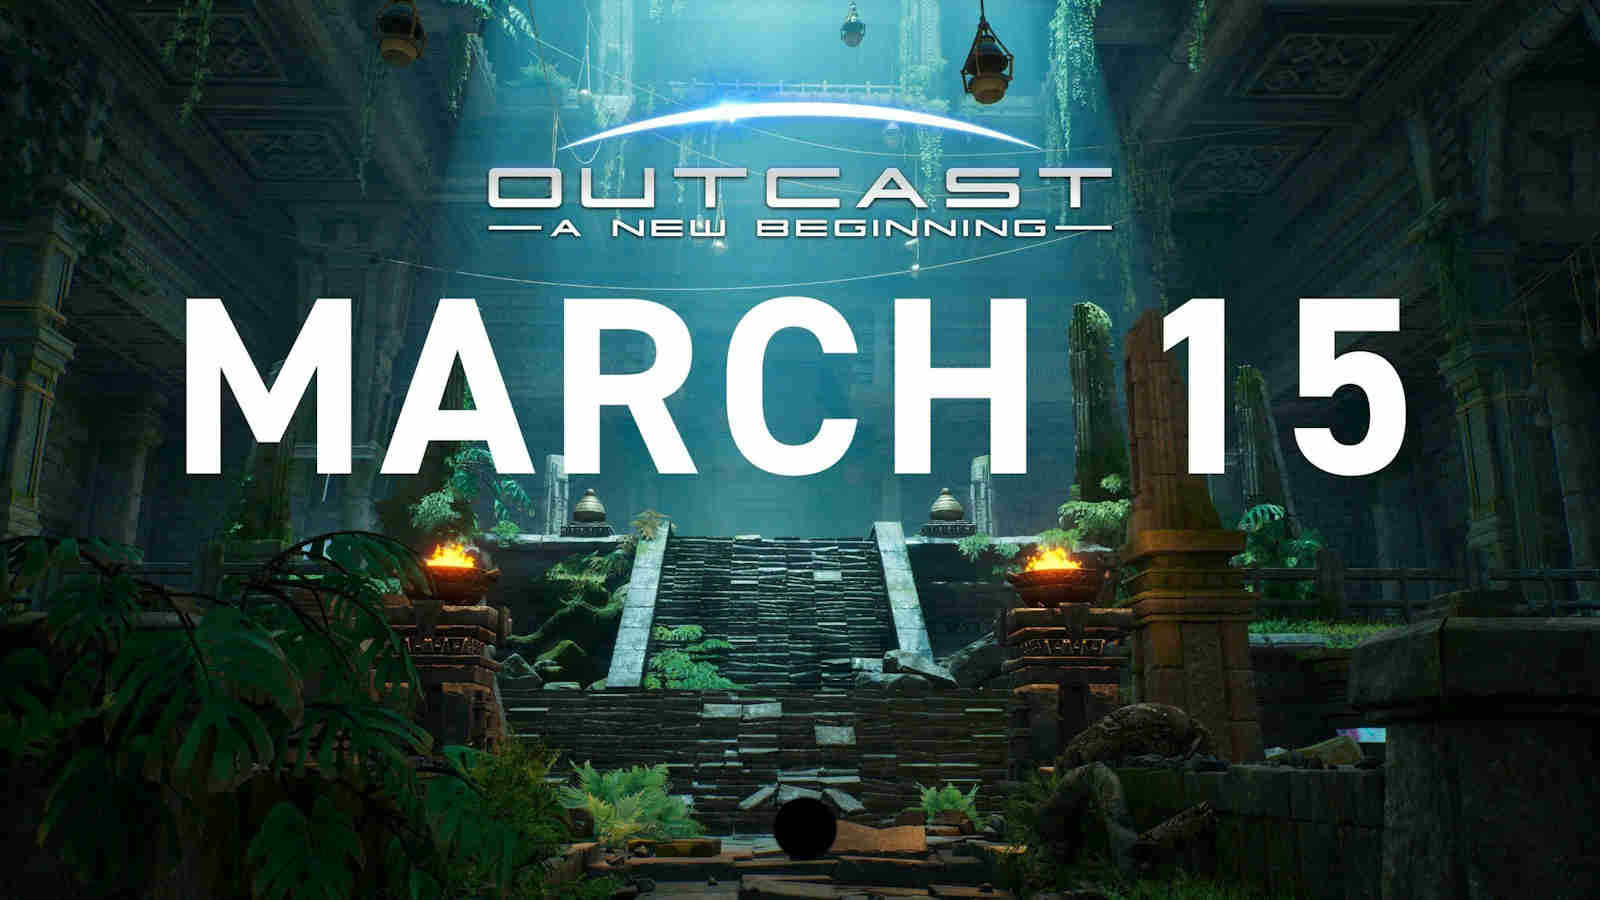 Outcast 2: A New Beginning Demo Download, Release Date, Pre-order Bonus & Special Edition Details